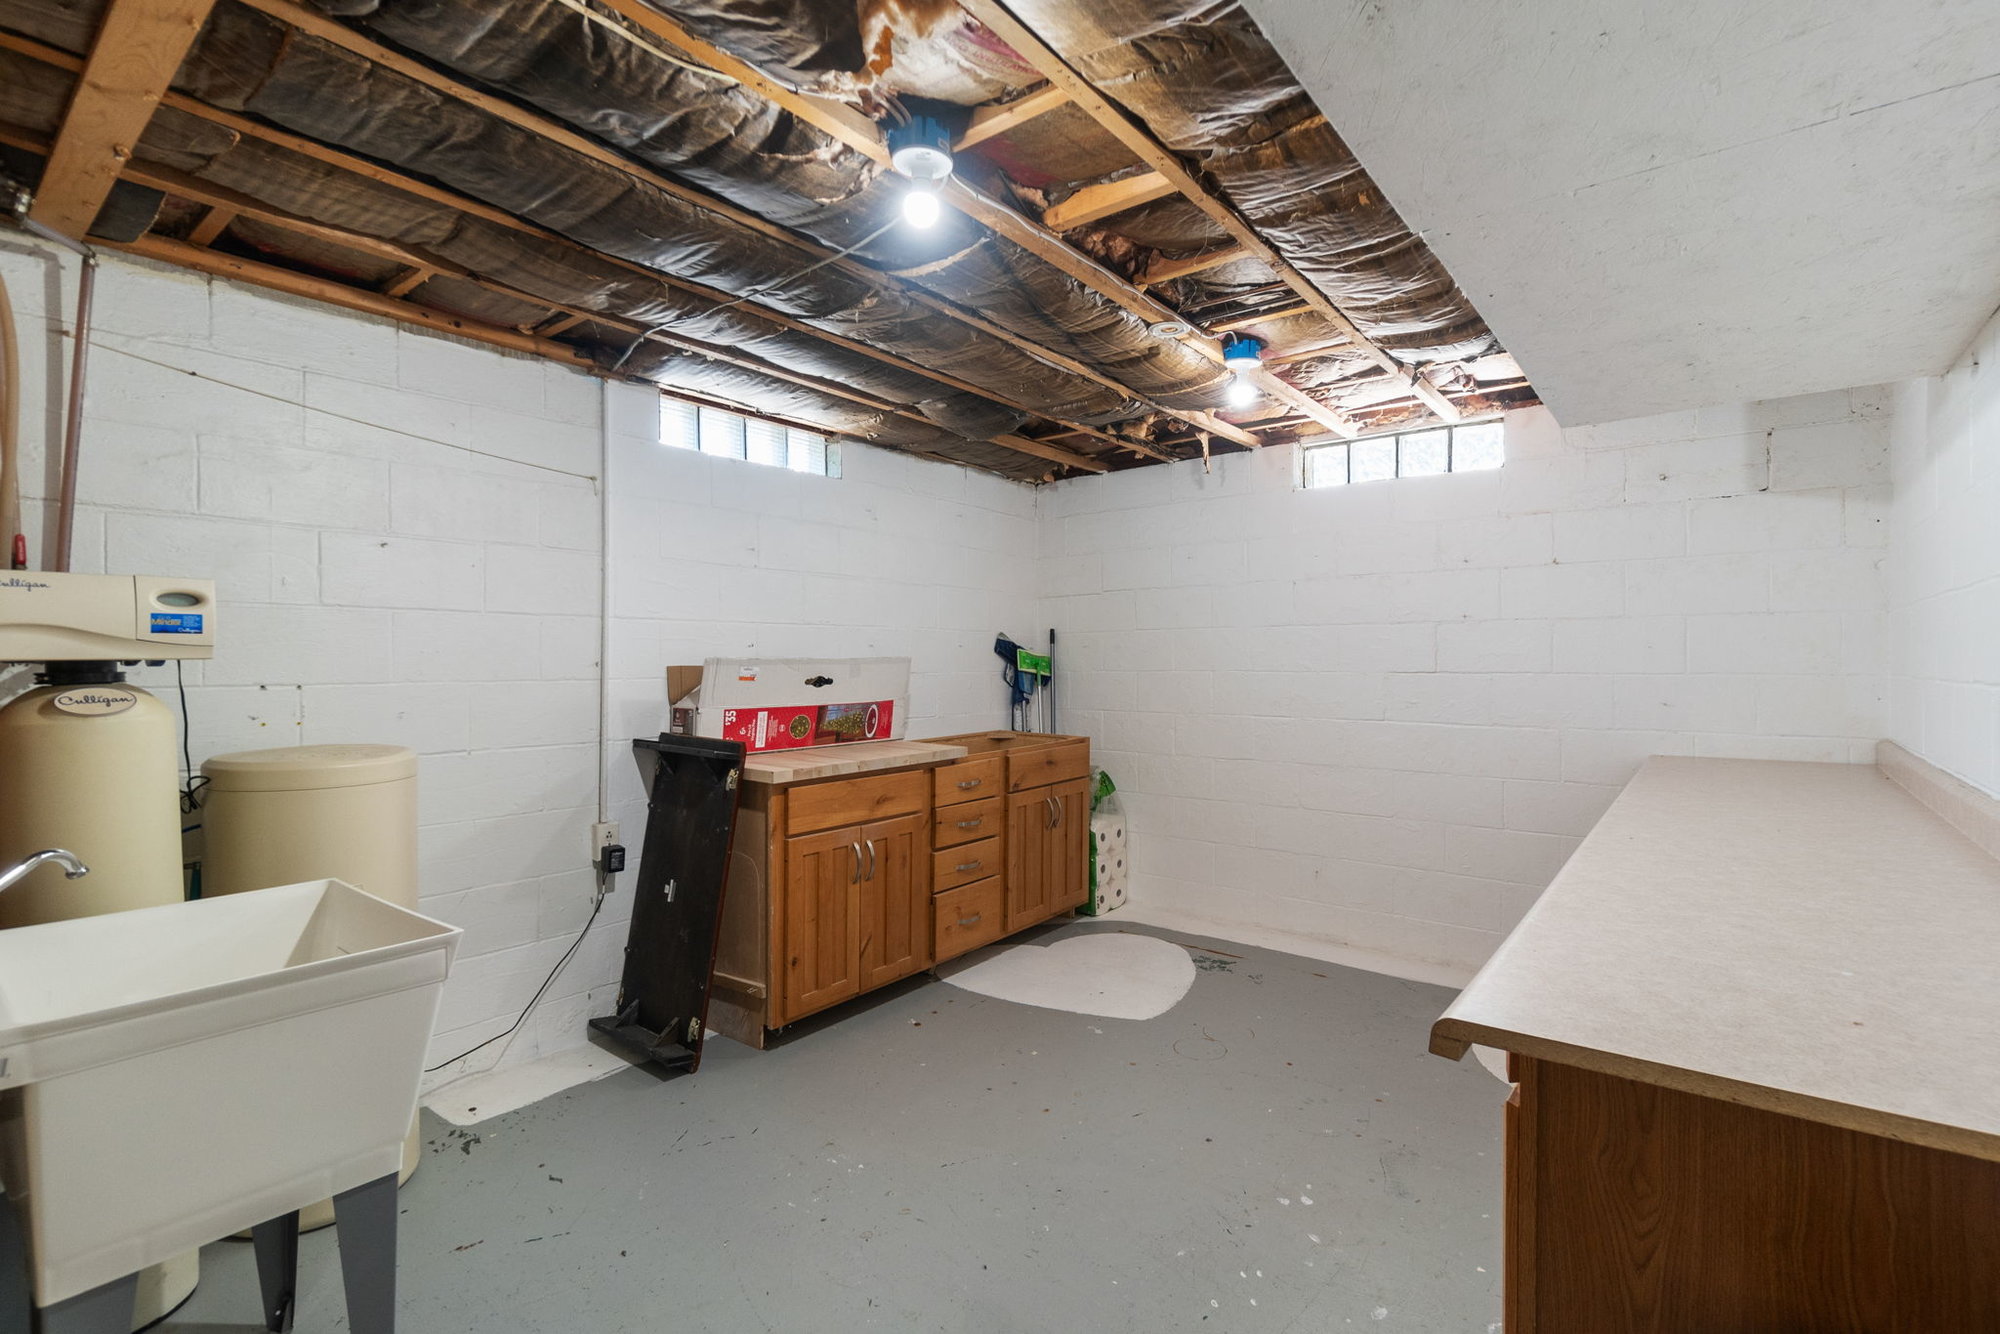 The Renovated Ranch with a Modern Beautiful Industrial Kitchen - 1627 Plymouth St., Waterloo